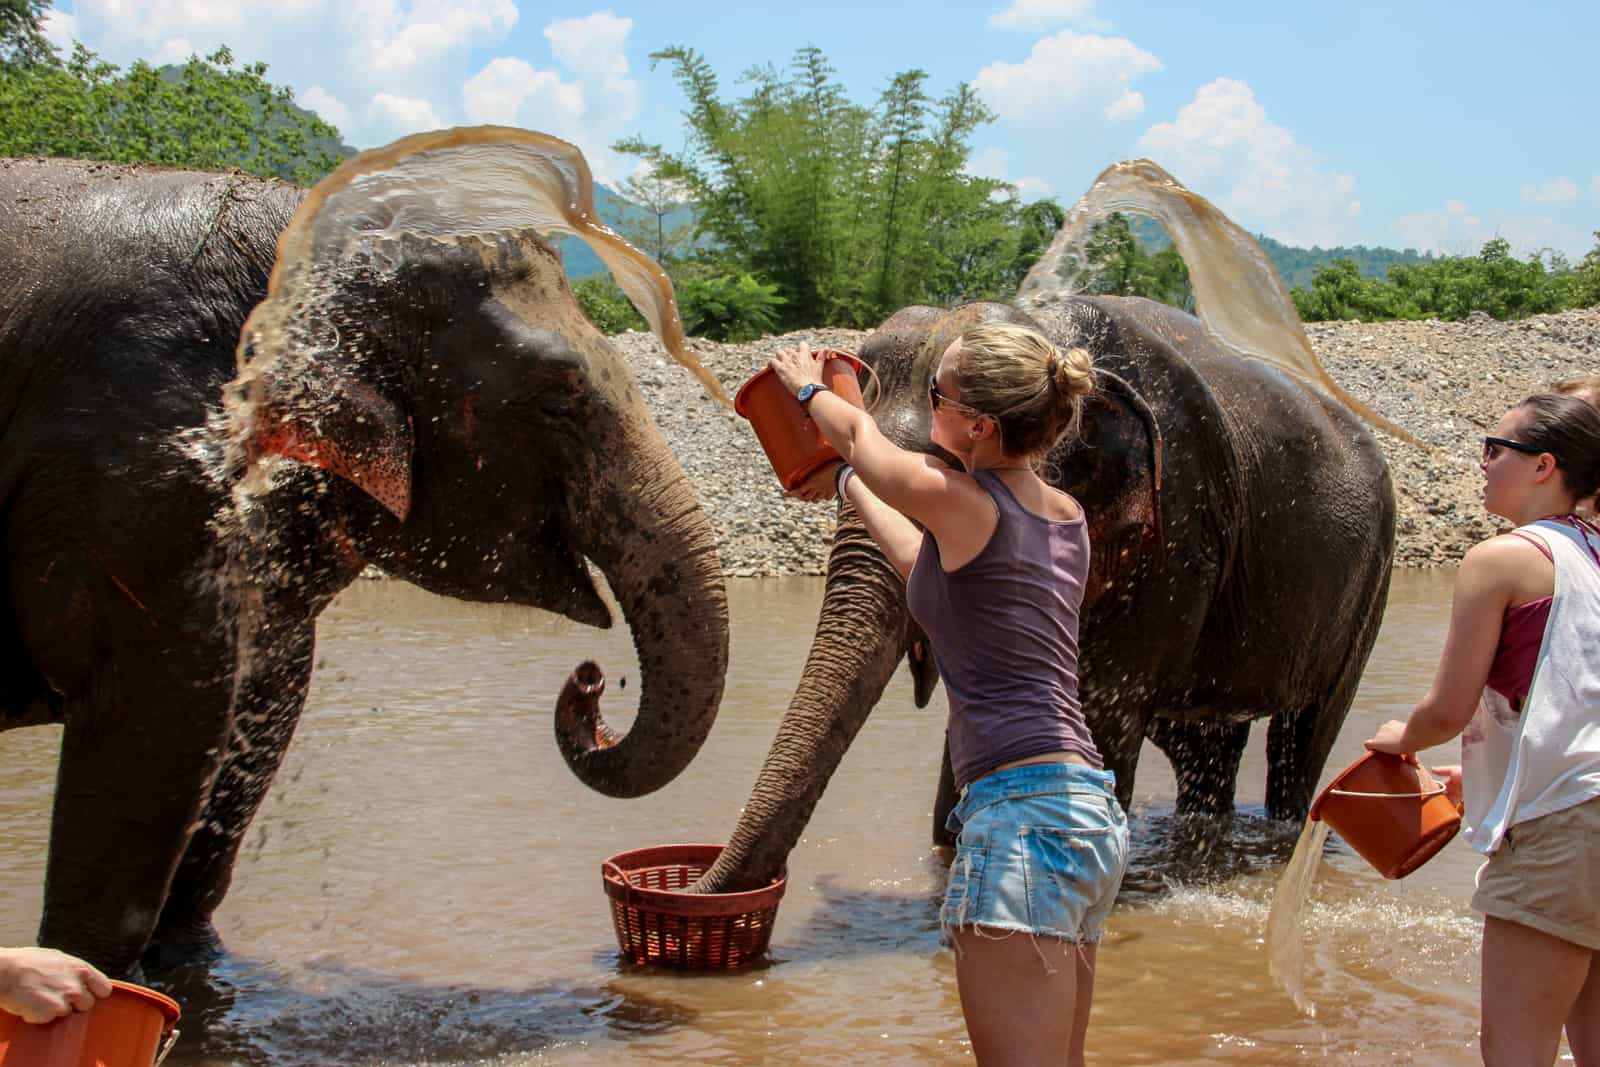 A tourist throws a bucket of water over an elephant at bathing time at an elephant sanctuary in Chiang Mai, northern Thailand. 